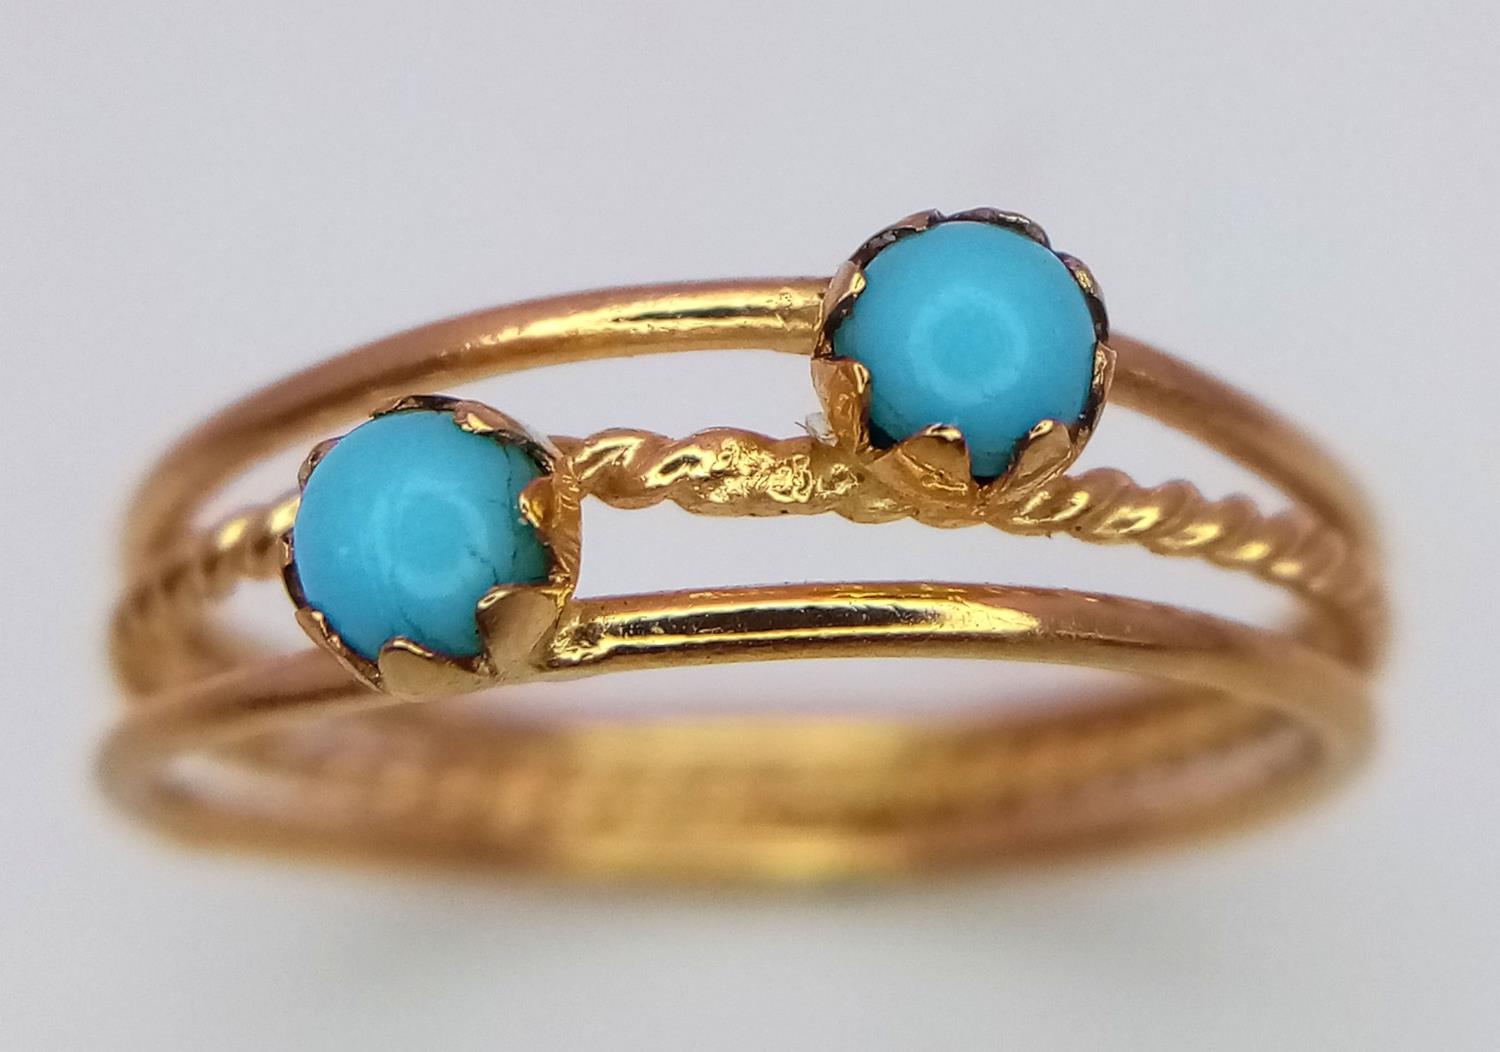 A 16ct Yellow Gold (tested as) Turquoise Band Ring, 4mm turquoise, size I 1/2, 1.6g total weight. - Image 2 of 5